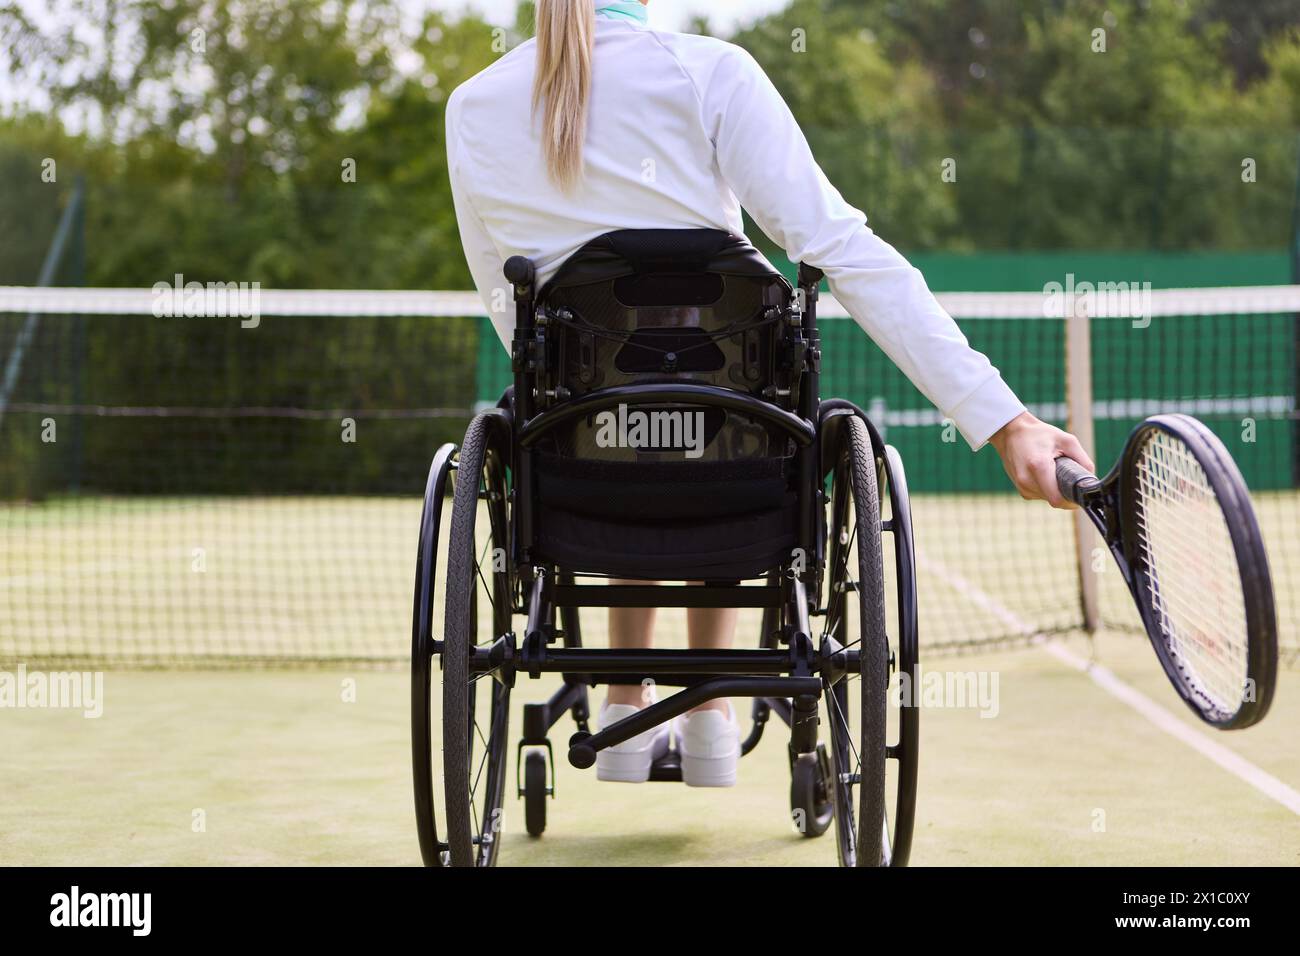 Focused and motivated, a person who uses a wheelchair holds a tennis racket on a court, showcasing accessibility and inclusion in sports. Stock Photo